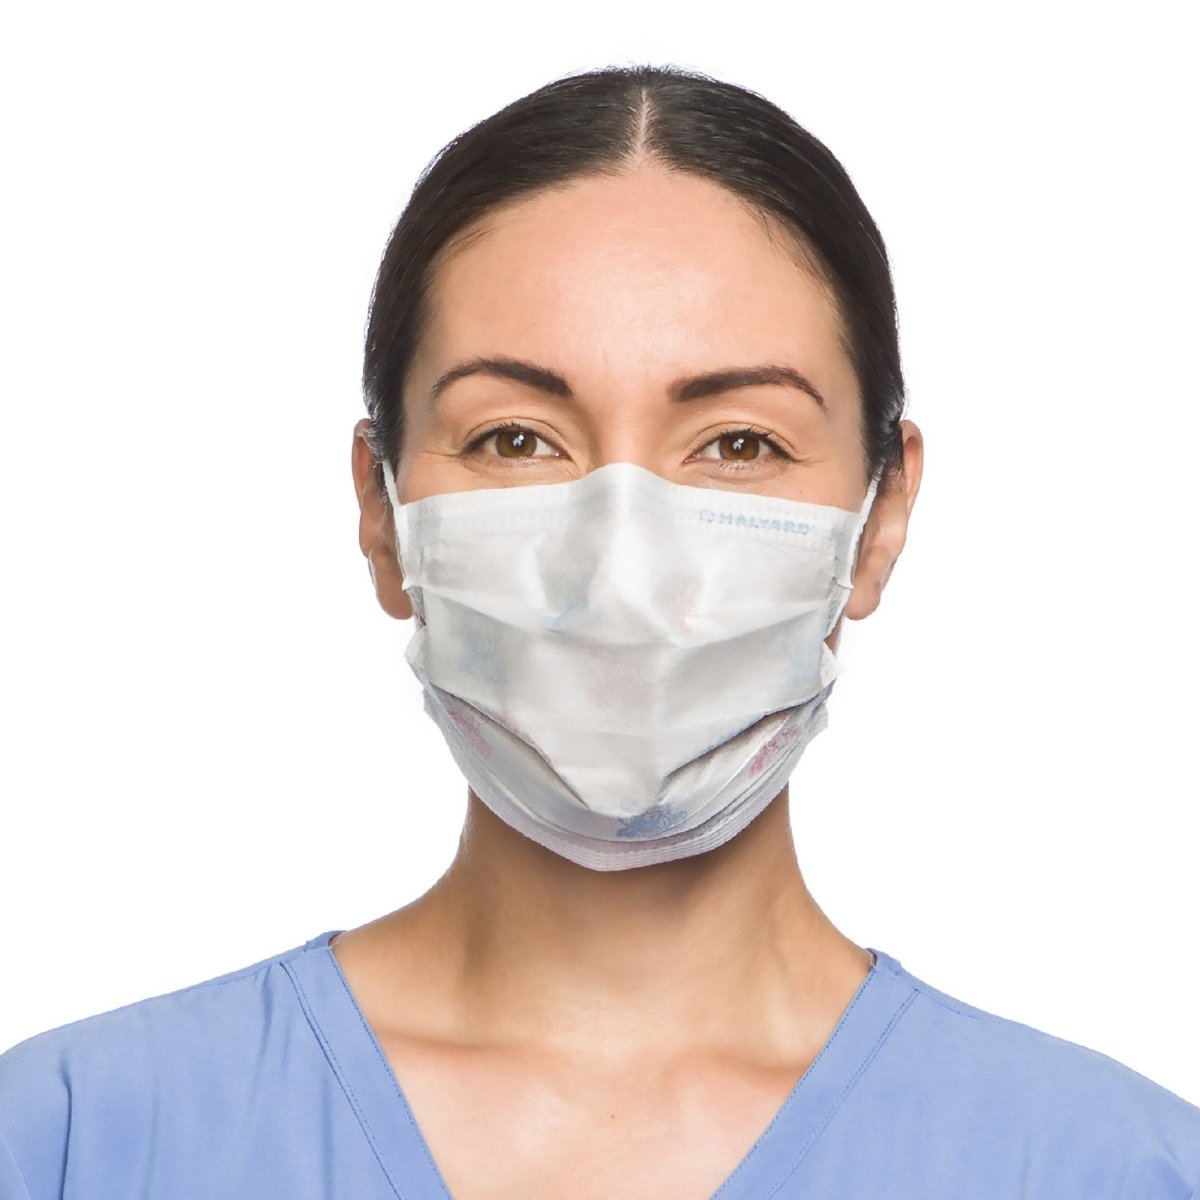 Halyard Procedure Mask, Pleated, One Size Fits Most, Yellow, Non-Sterile - 233680_BX - 1